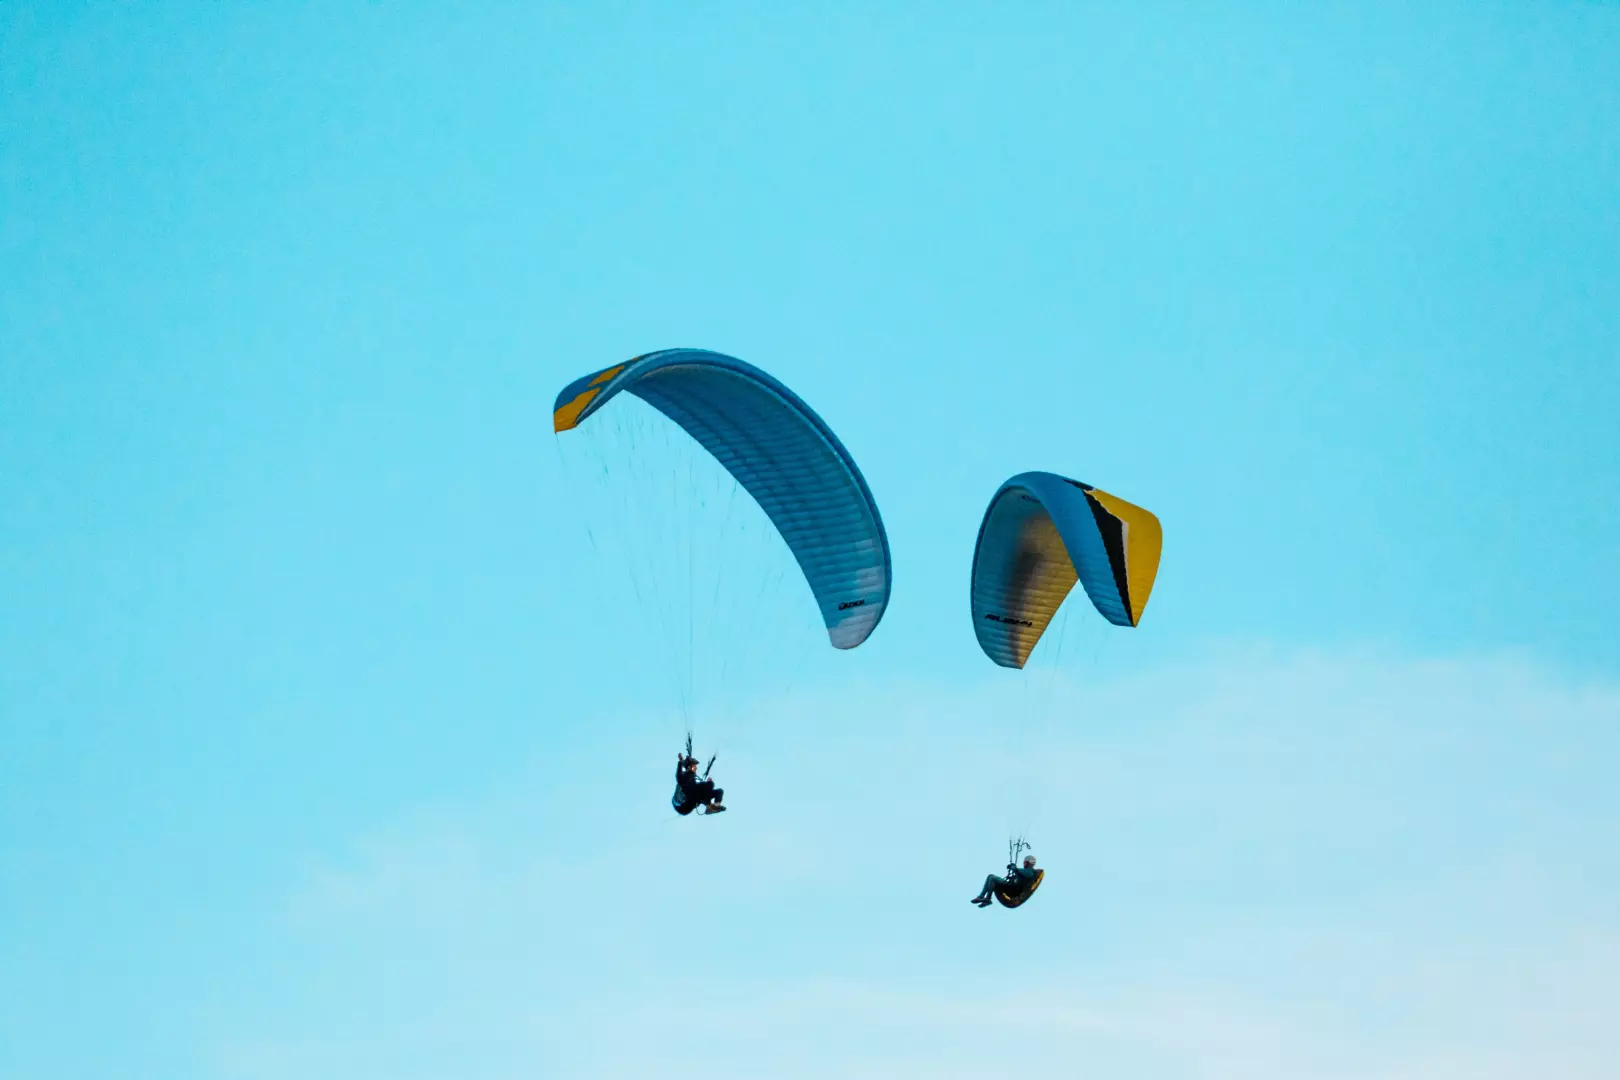 Taking care of your body and your health when paragliding